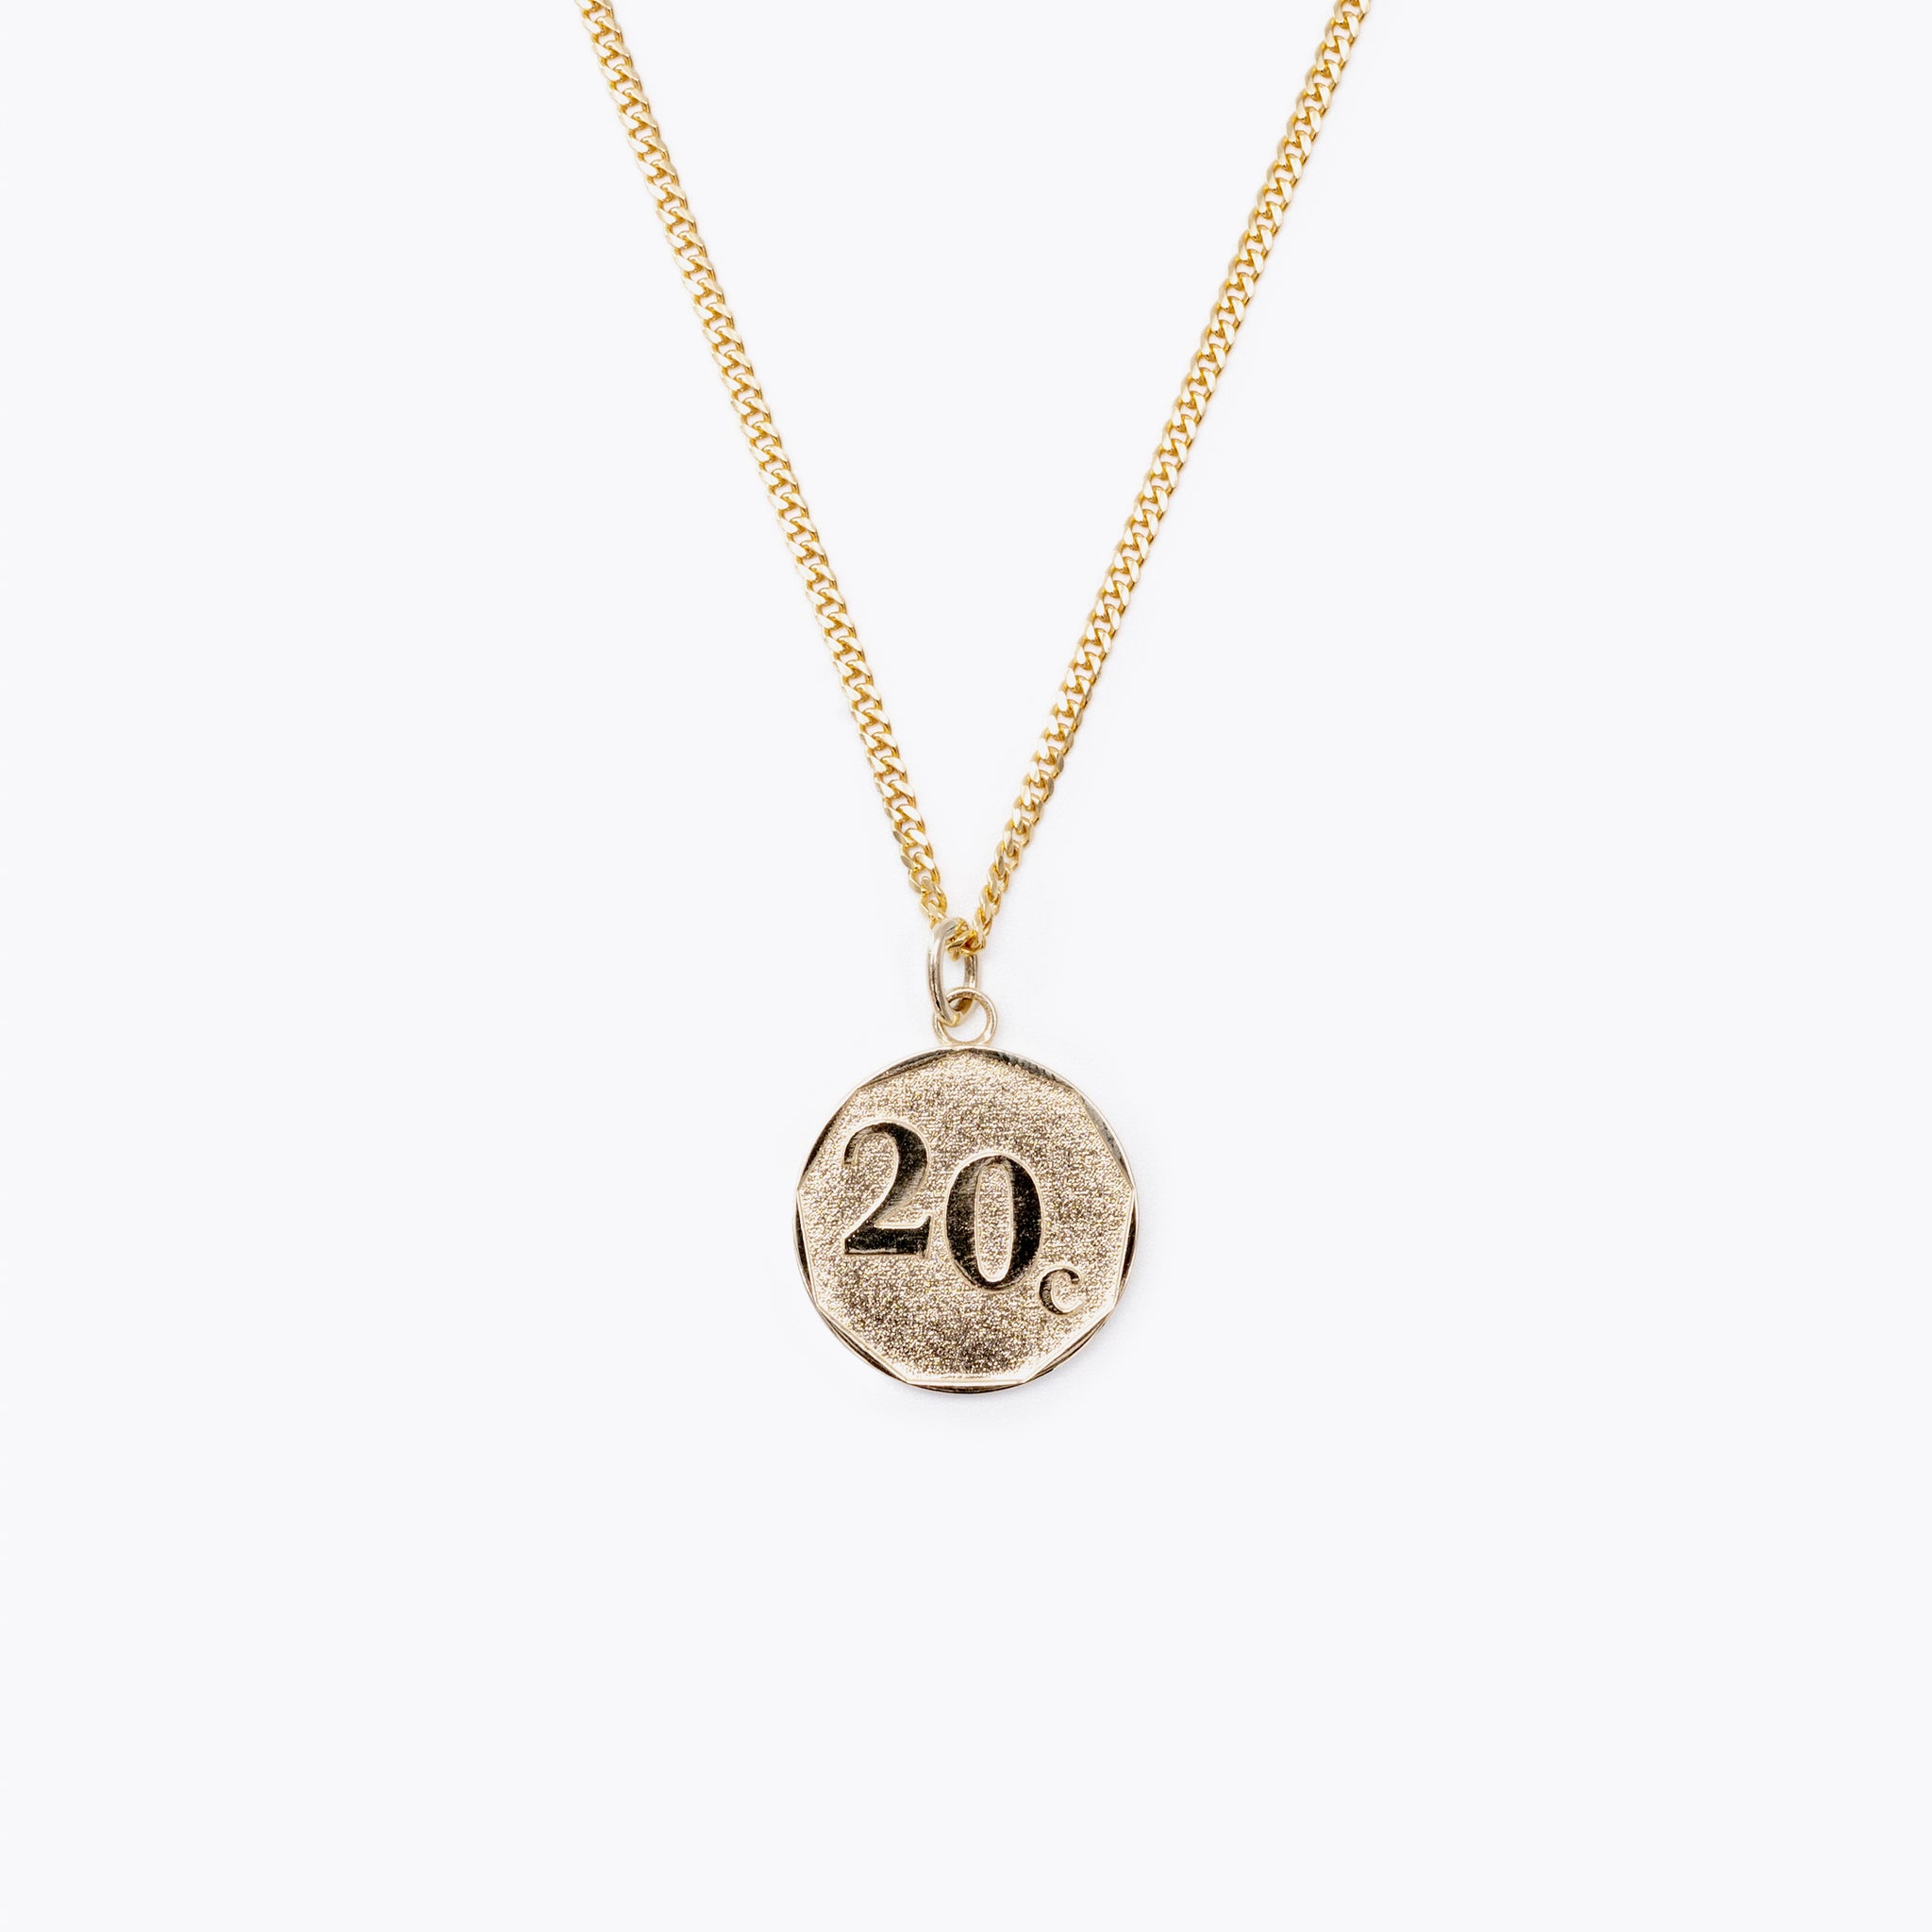 9K Gold 20c Coin Necklace